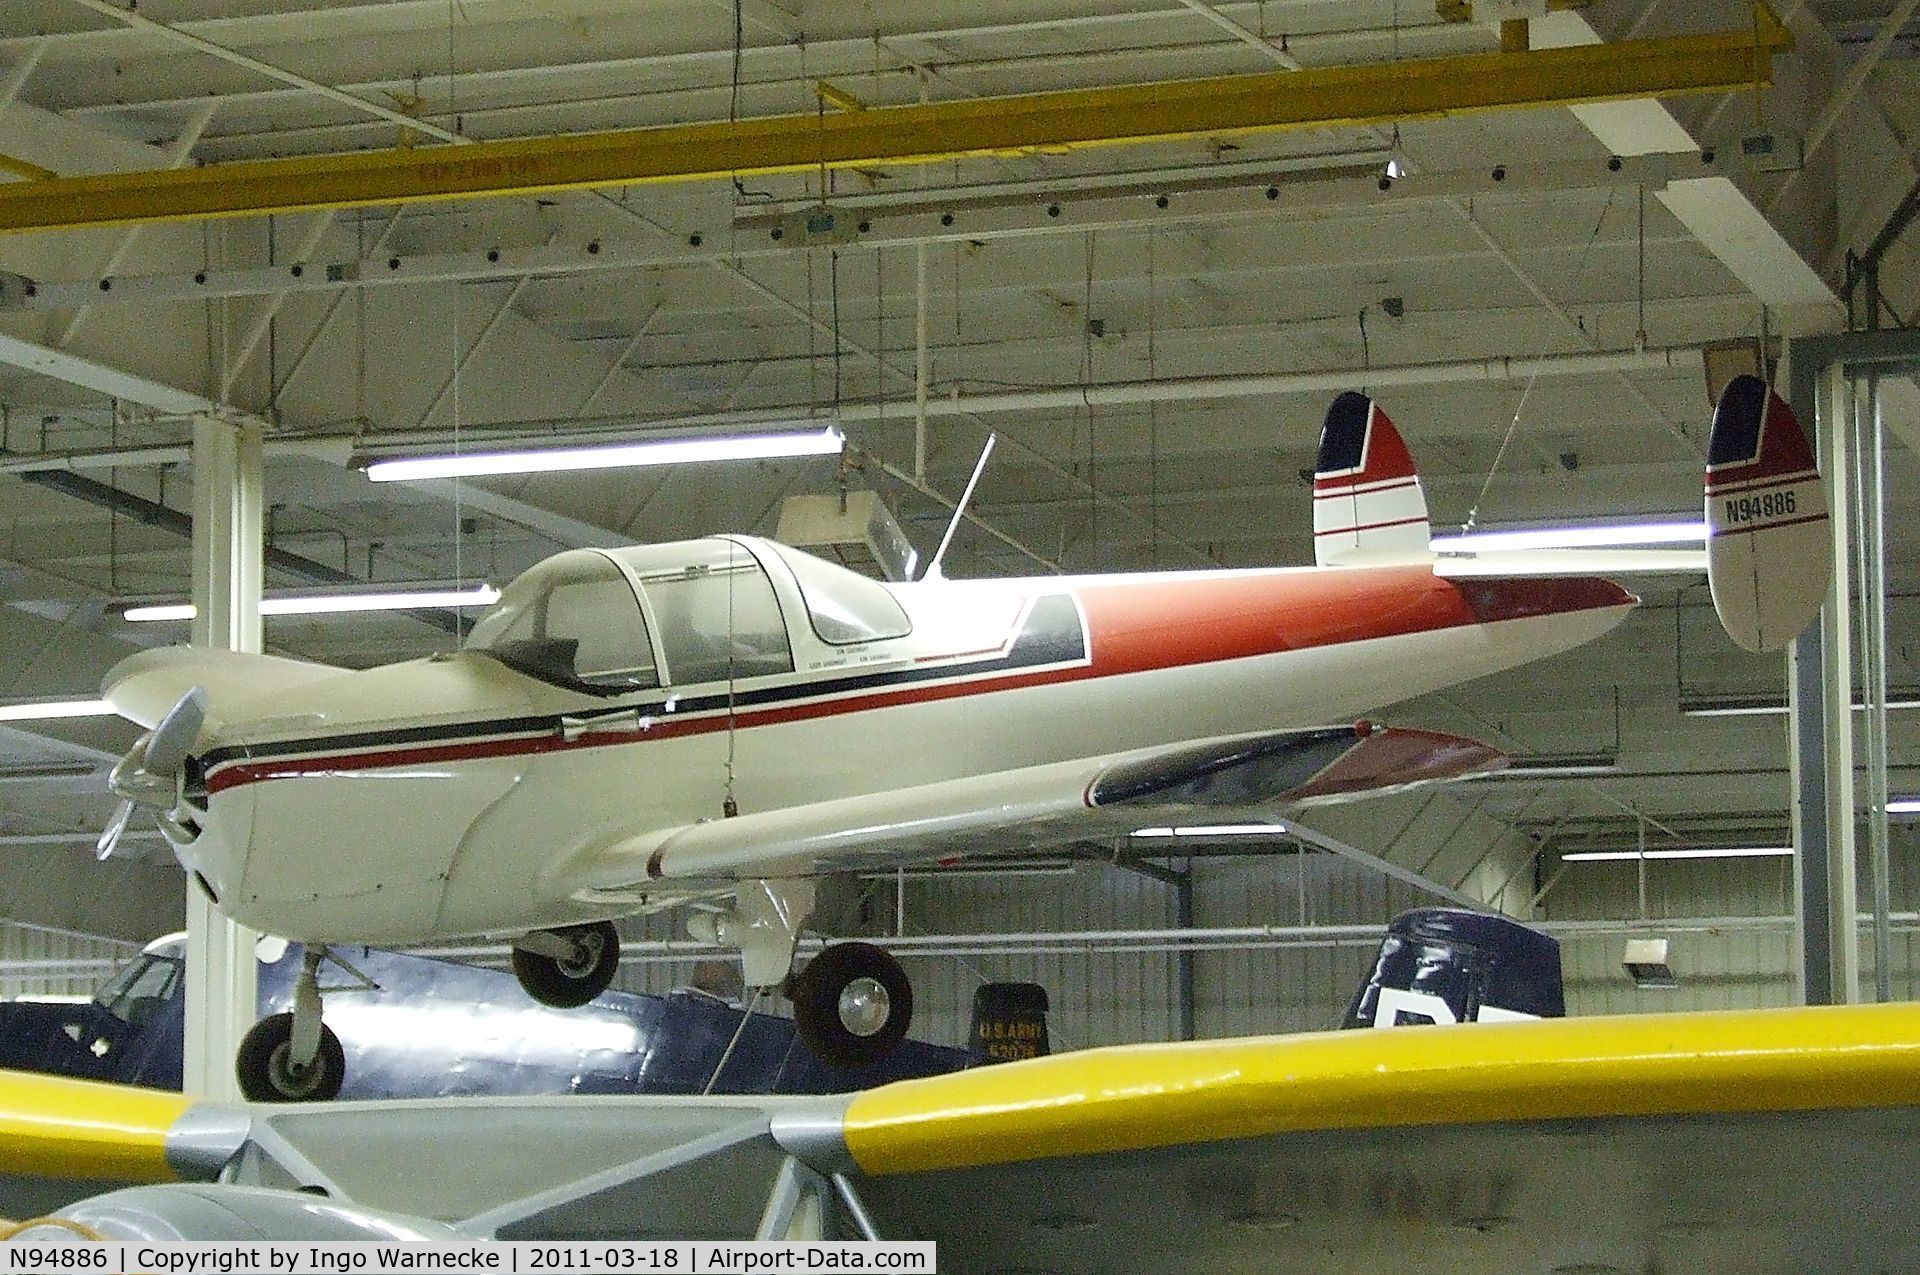 N94886, 1949 Erco 415G Ercoupe C/N 5014, ERCO Ercoupe G at the Mid-America Air Museum, Liberal KS